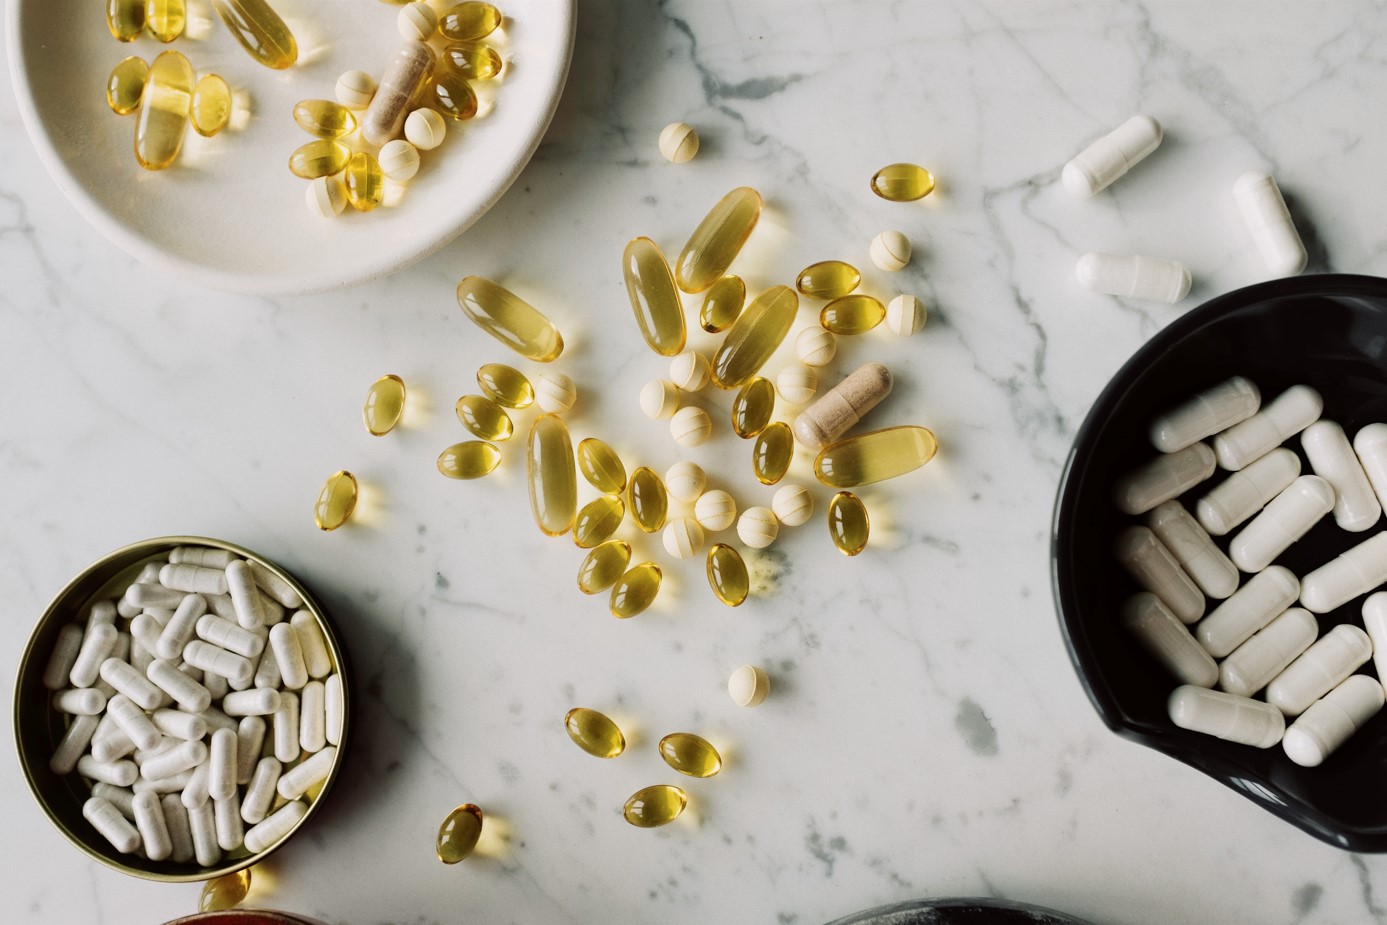 A beginner’s guide to understanding probiotics and how to maintain a healthy gut